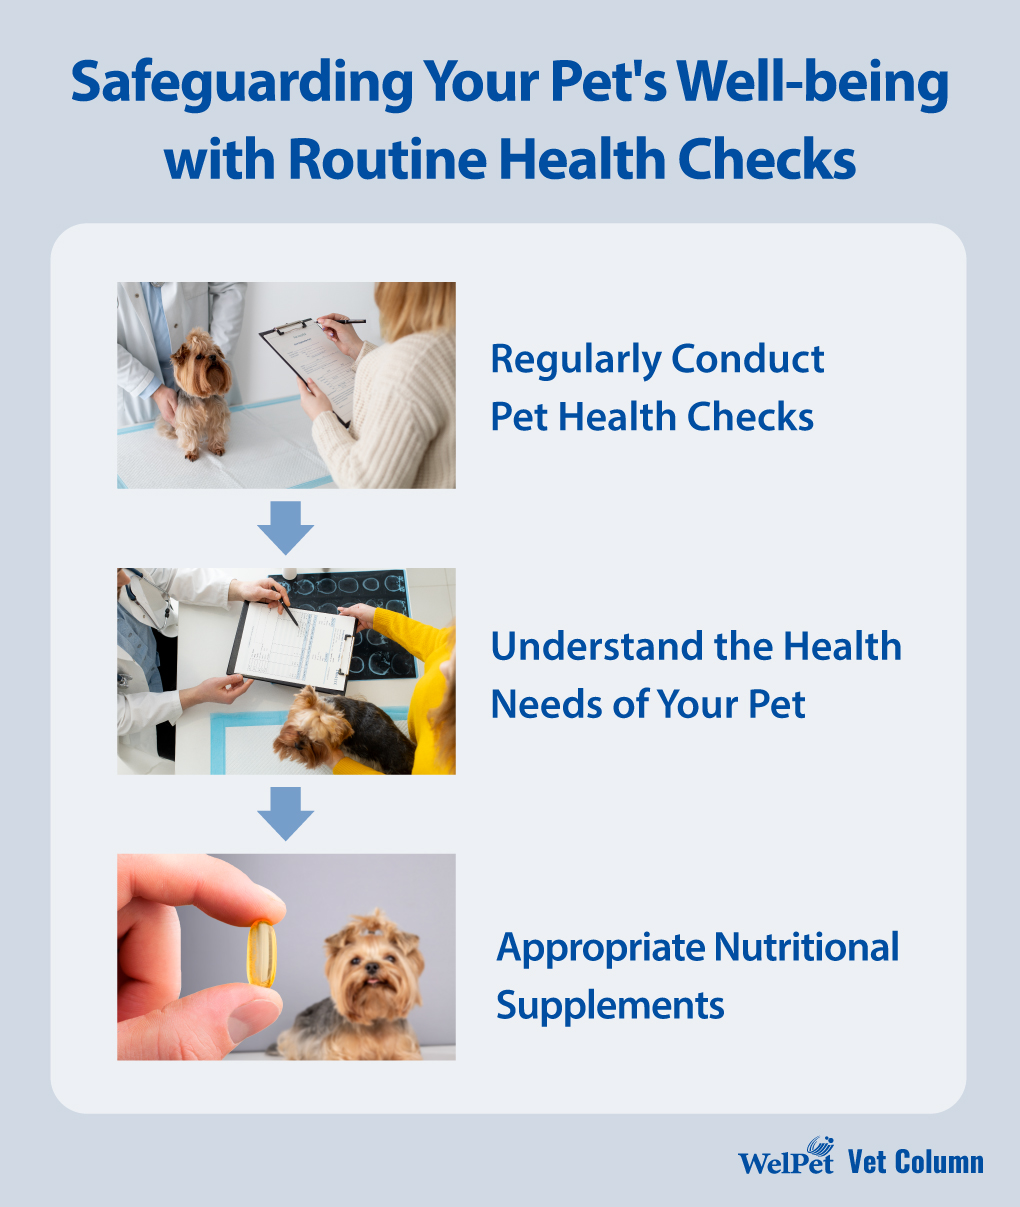 welpet- Safeguarding Your Pet's Well-being with Routine Health Checks